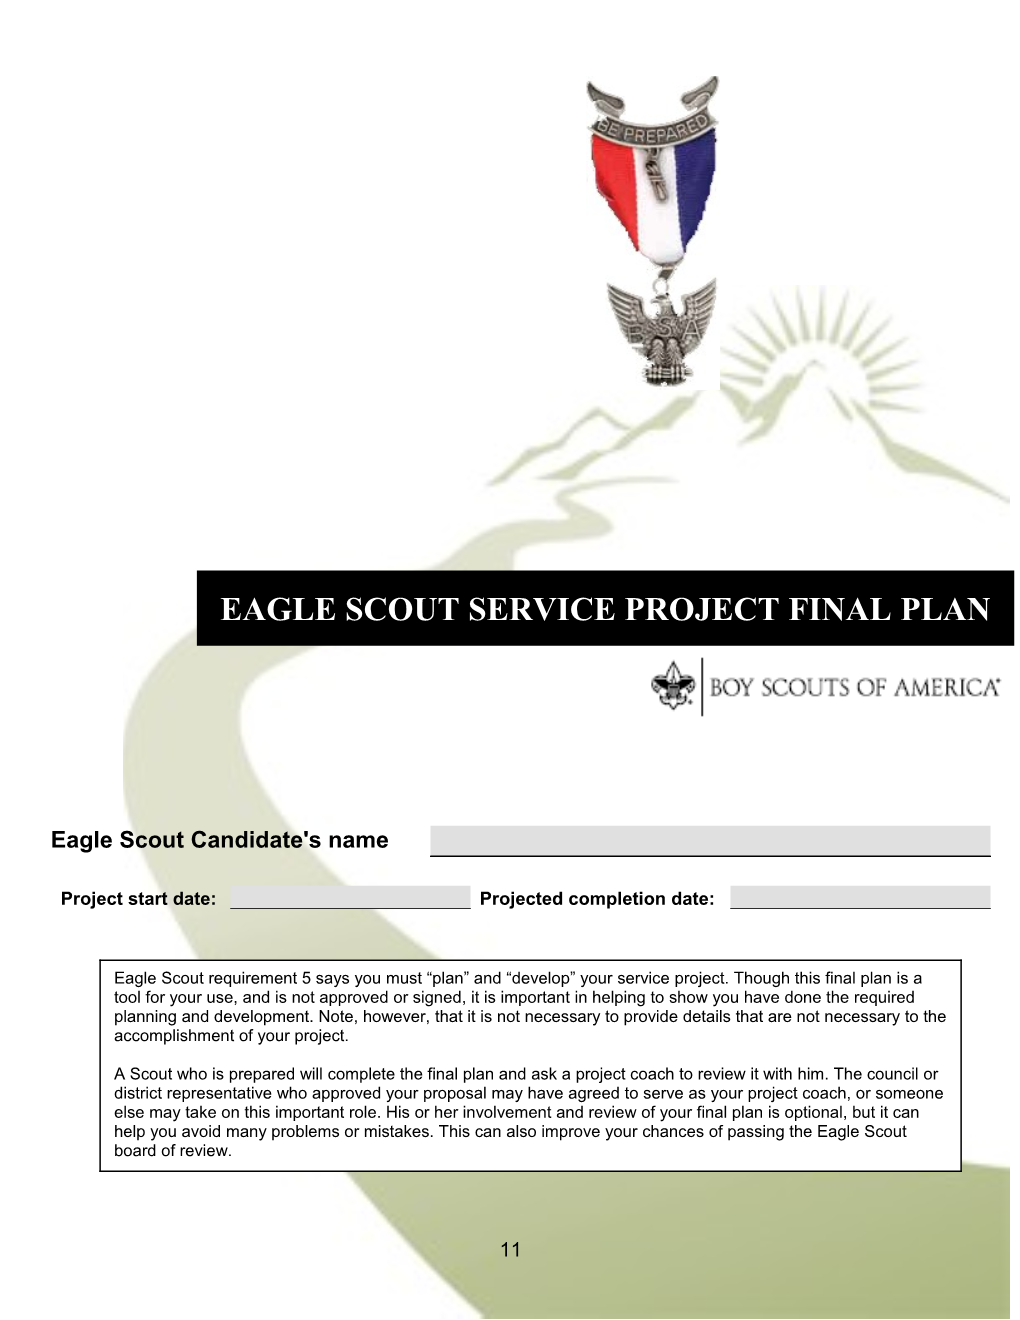 Eagle Scout Service Project Final Plan, Continued